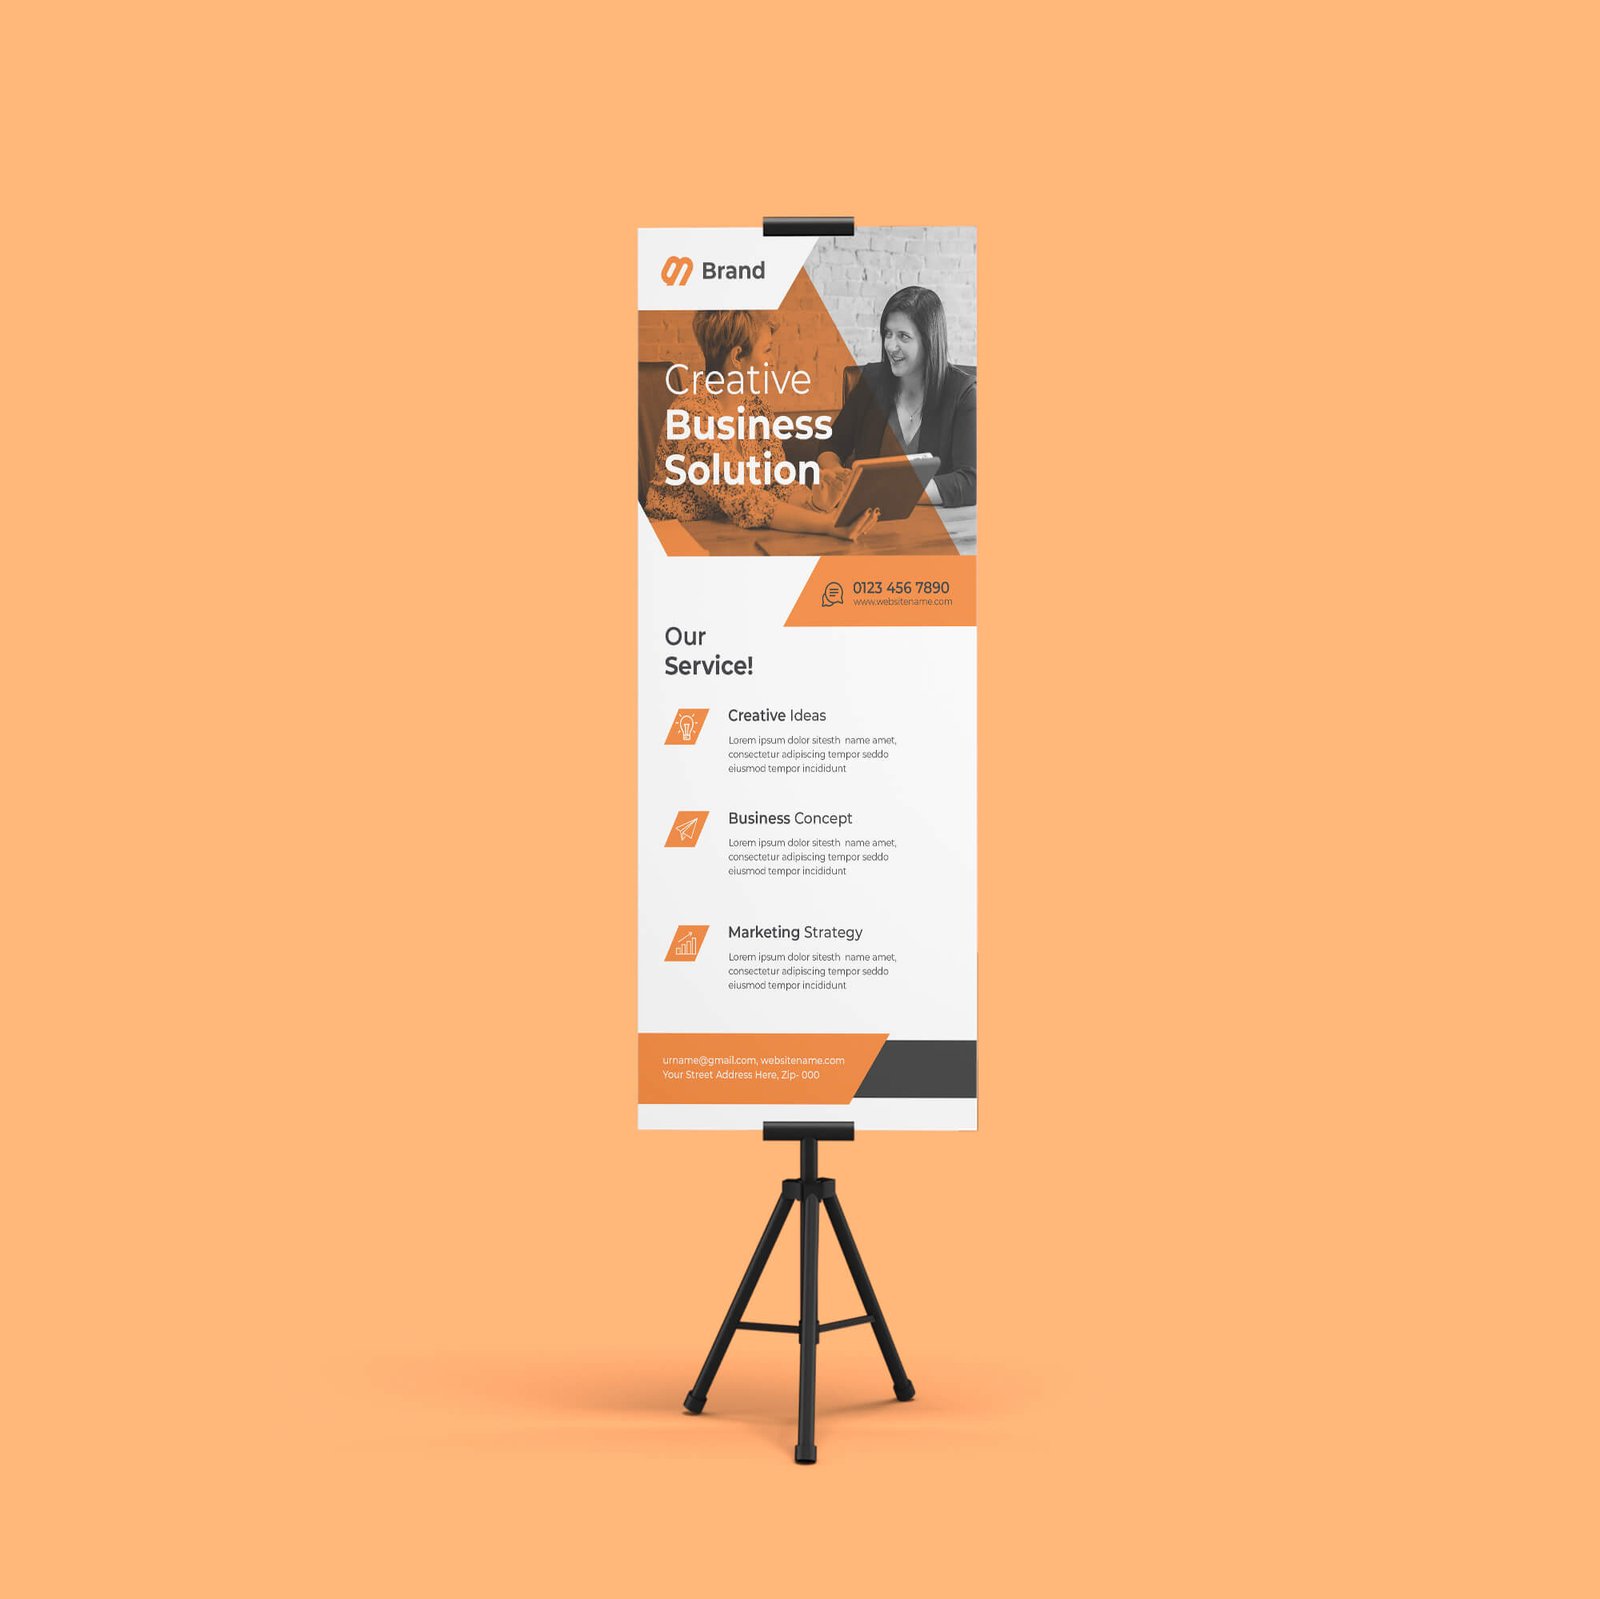 Design Free Exhibition Stand Mockup PSD Template